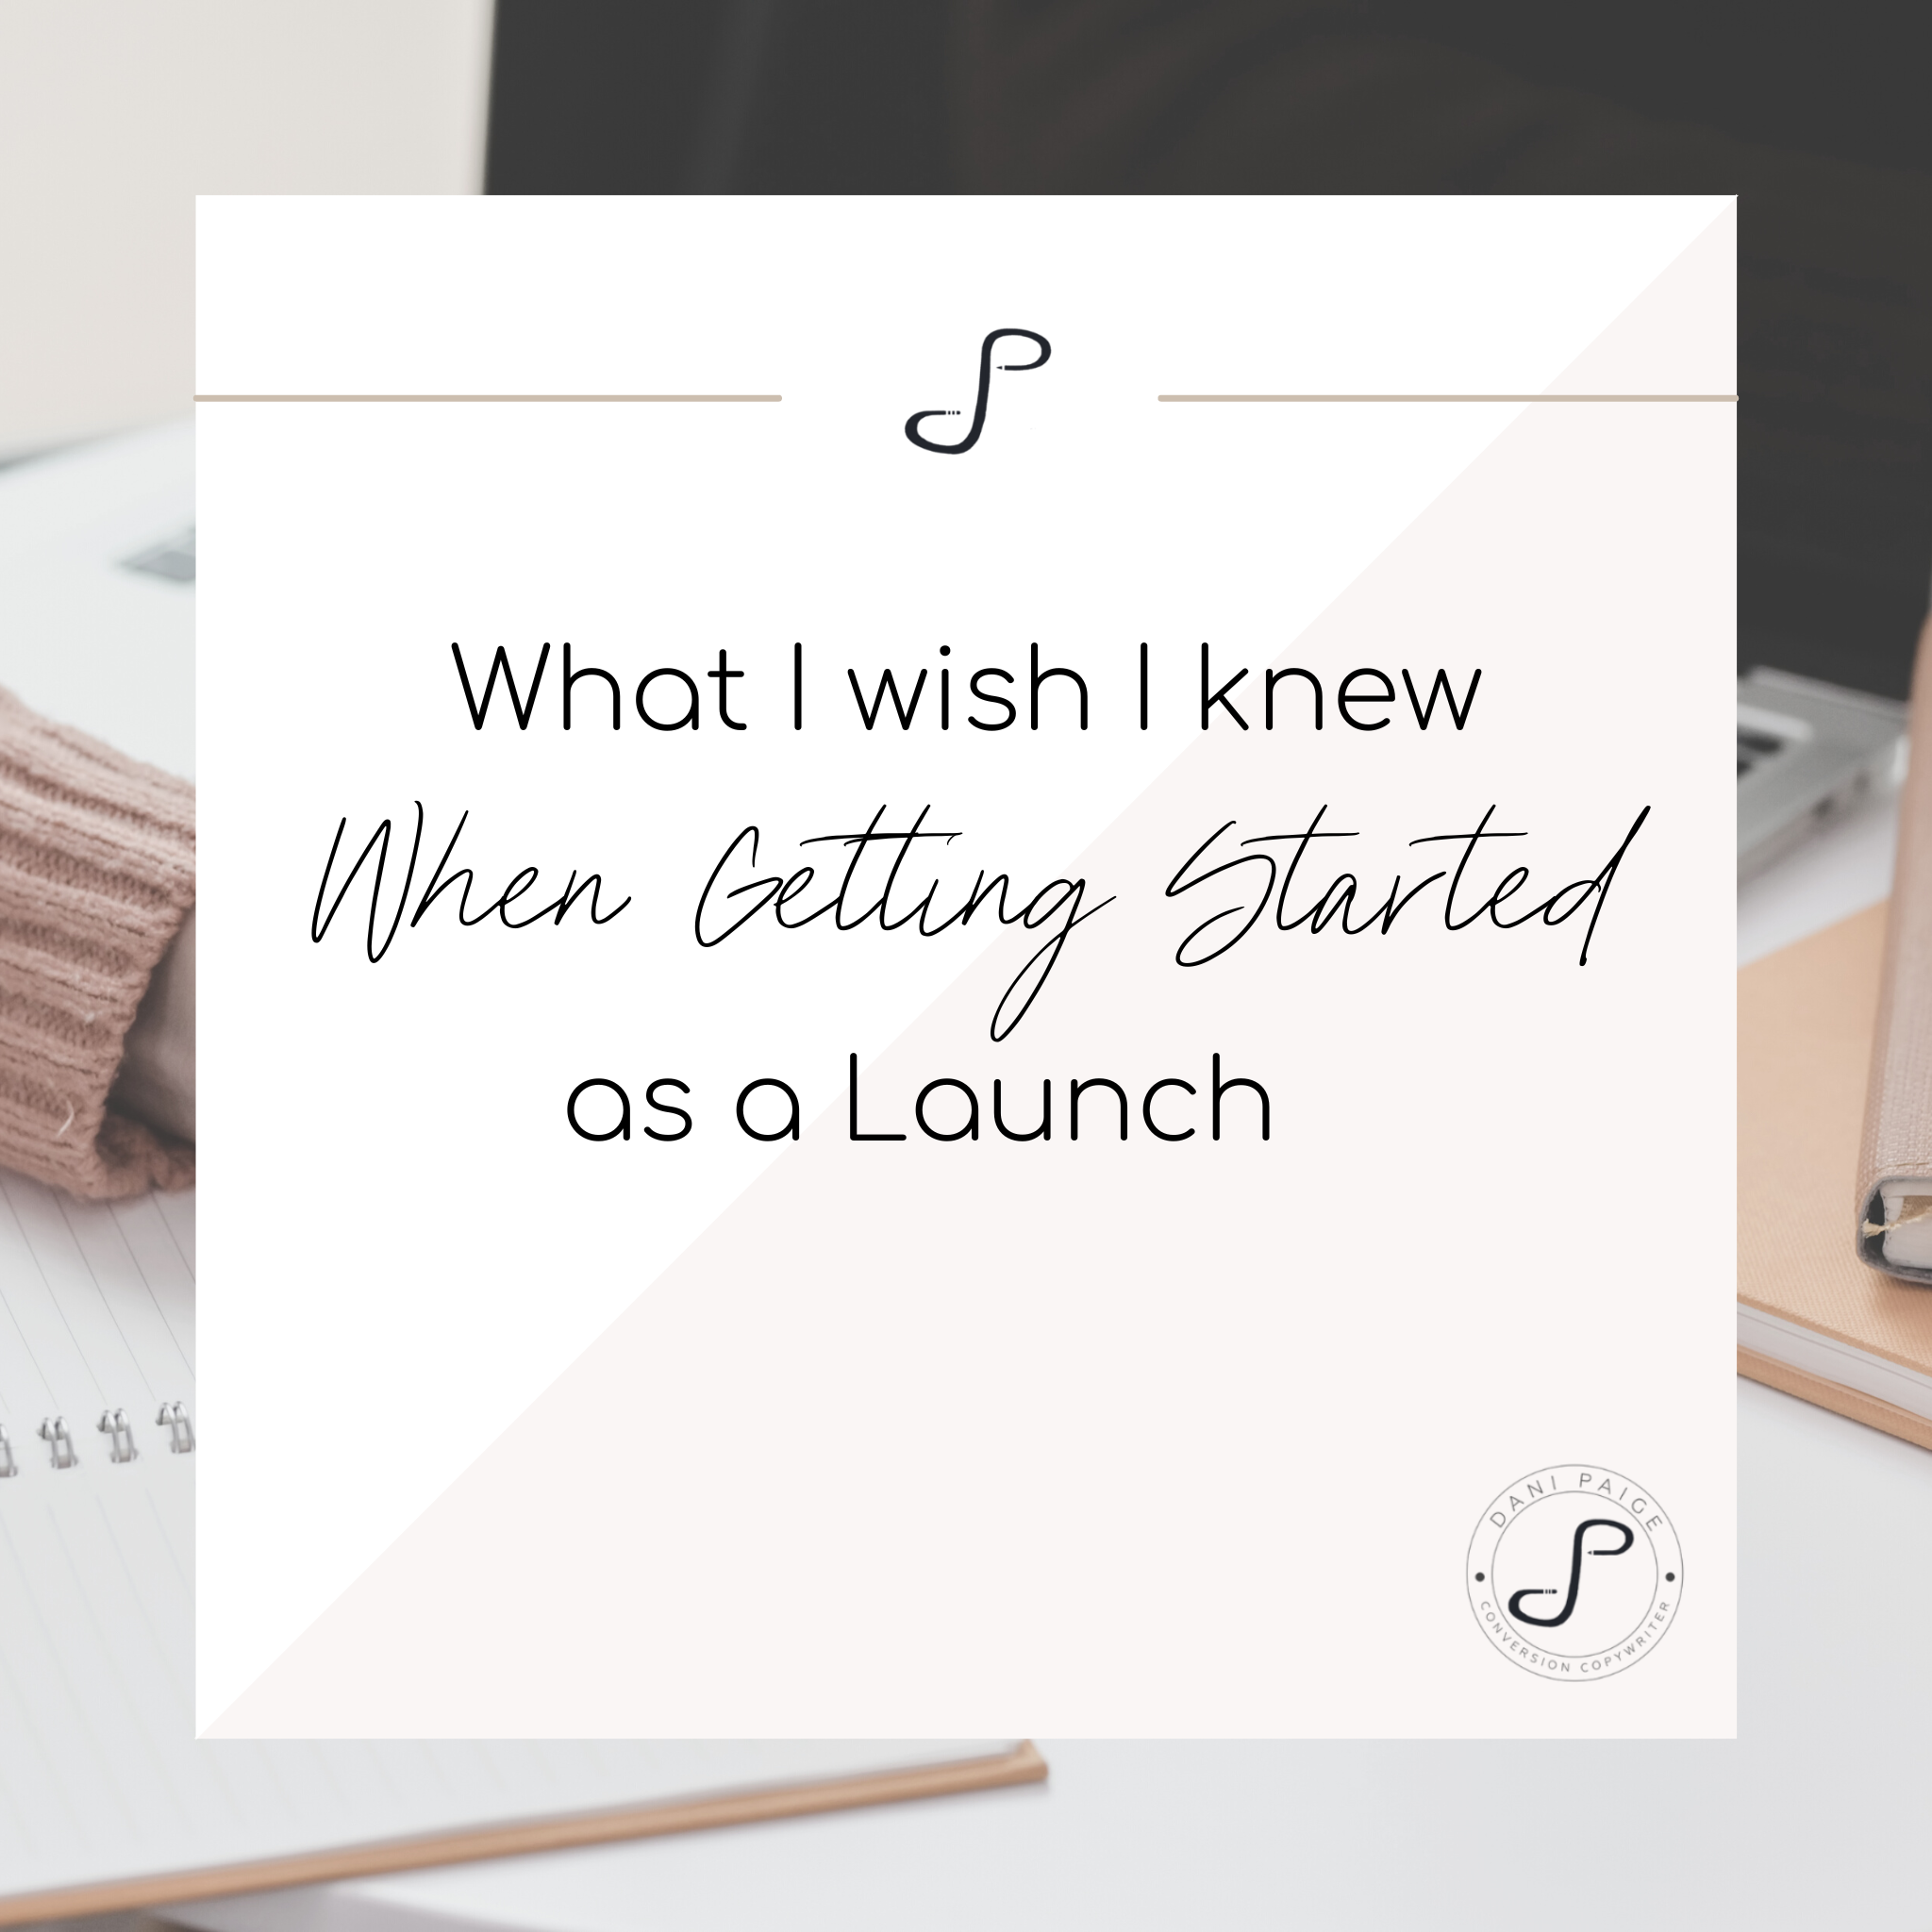 What I Wish I Knew When Getting Started as a Launch